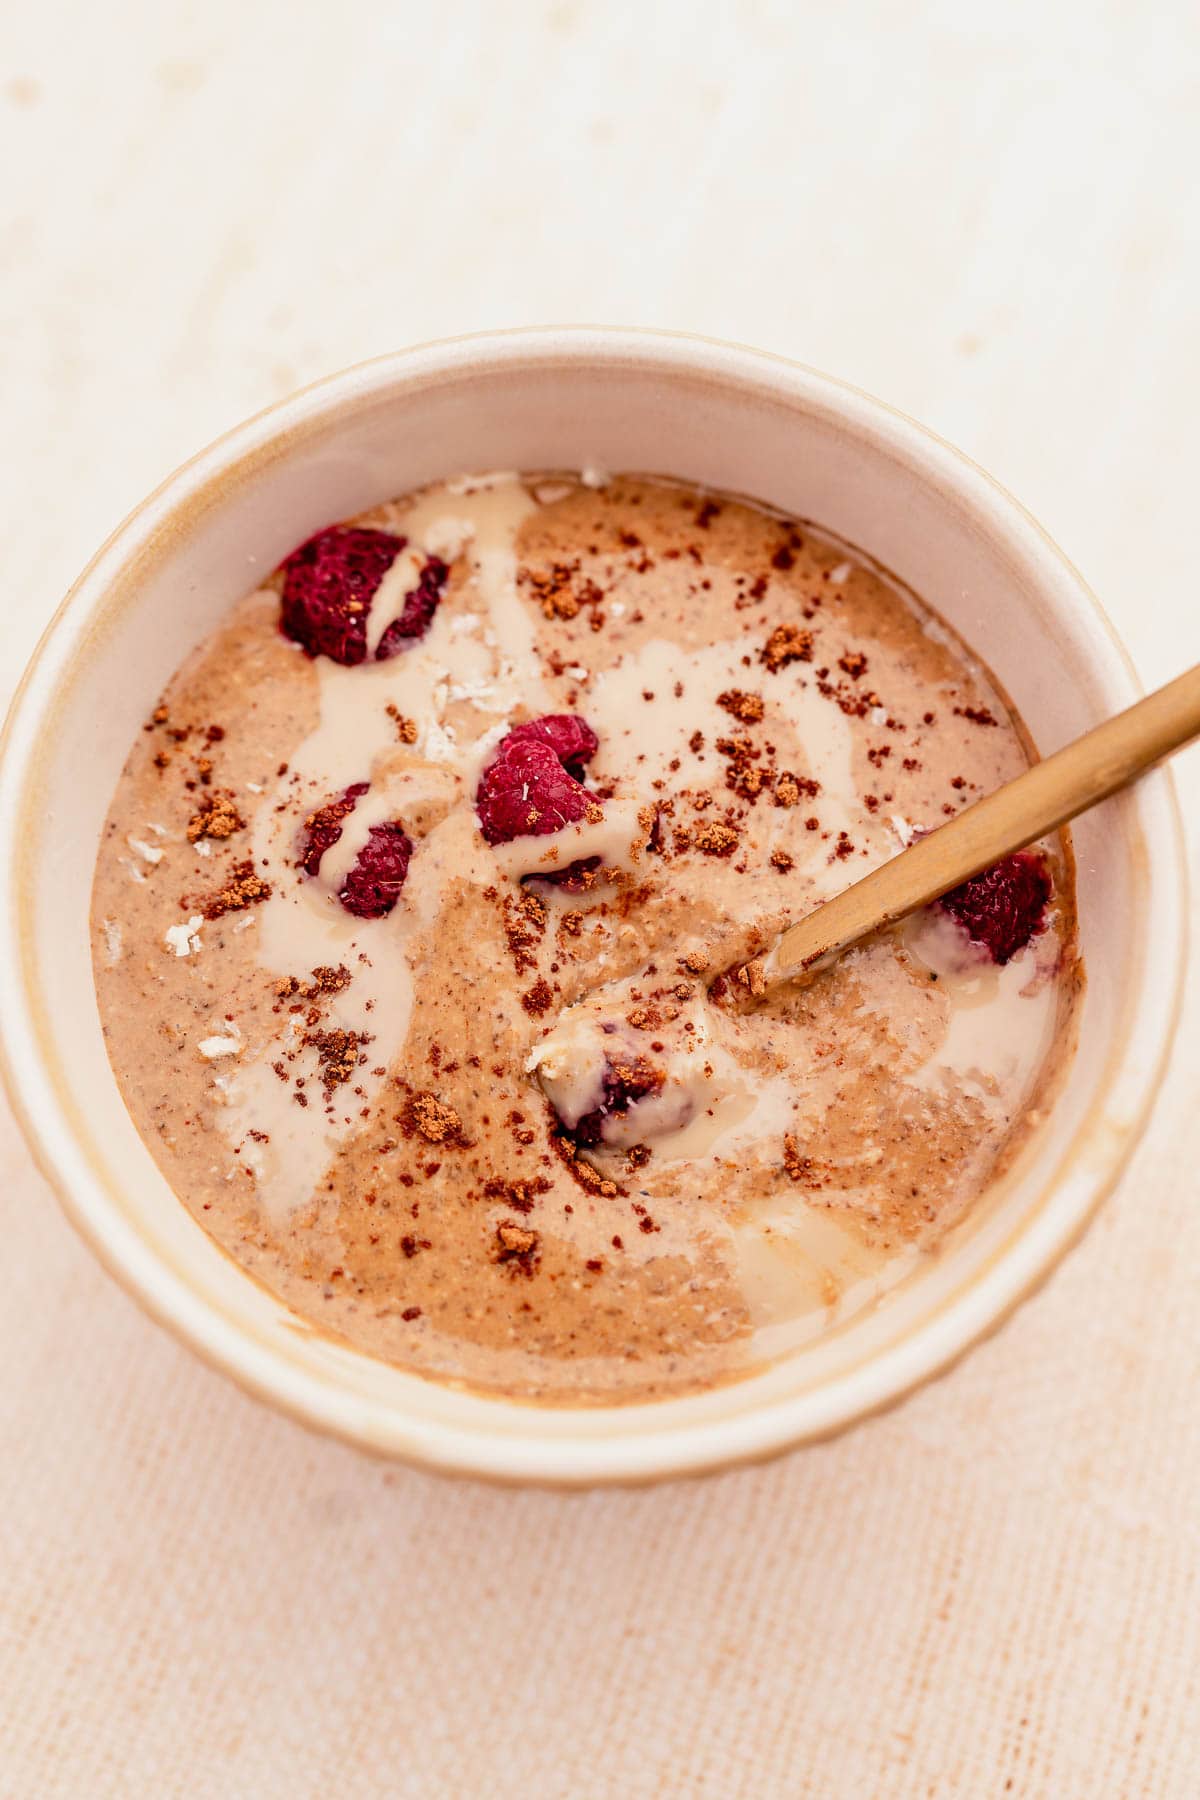 A bowl of oatmeal with blended raspberries.